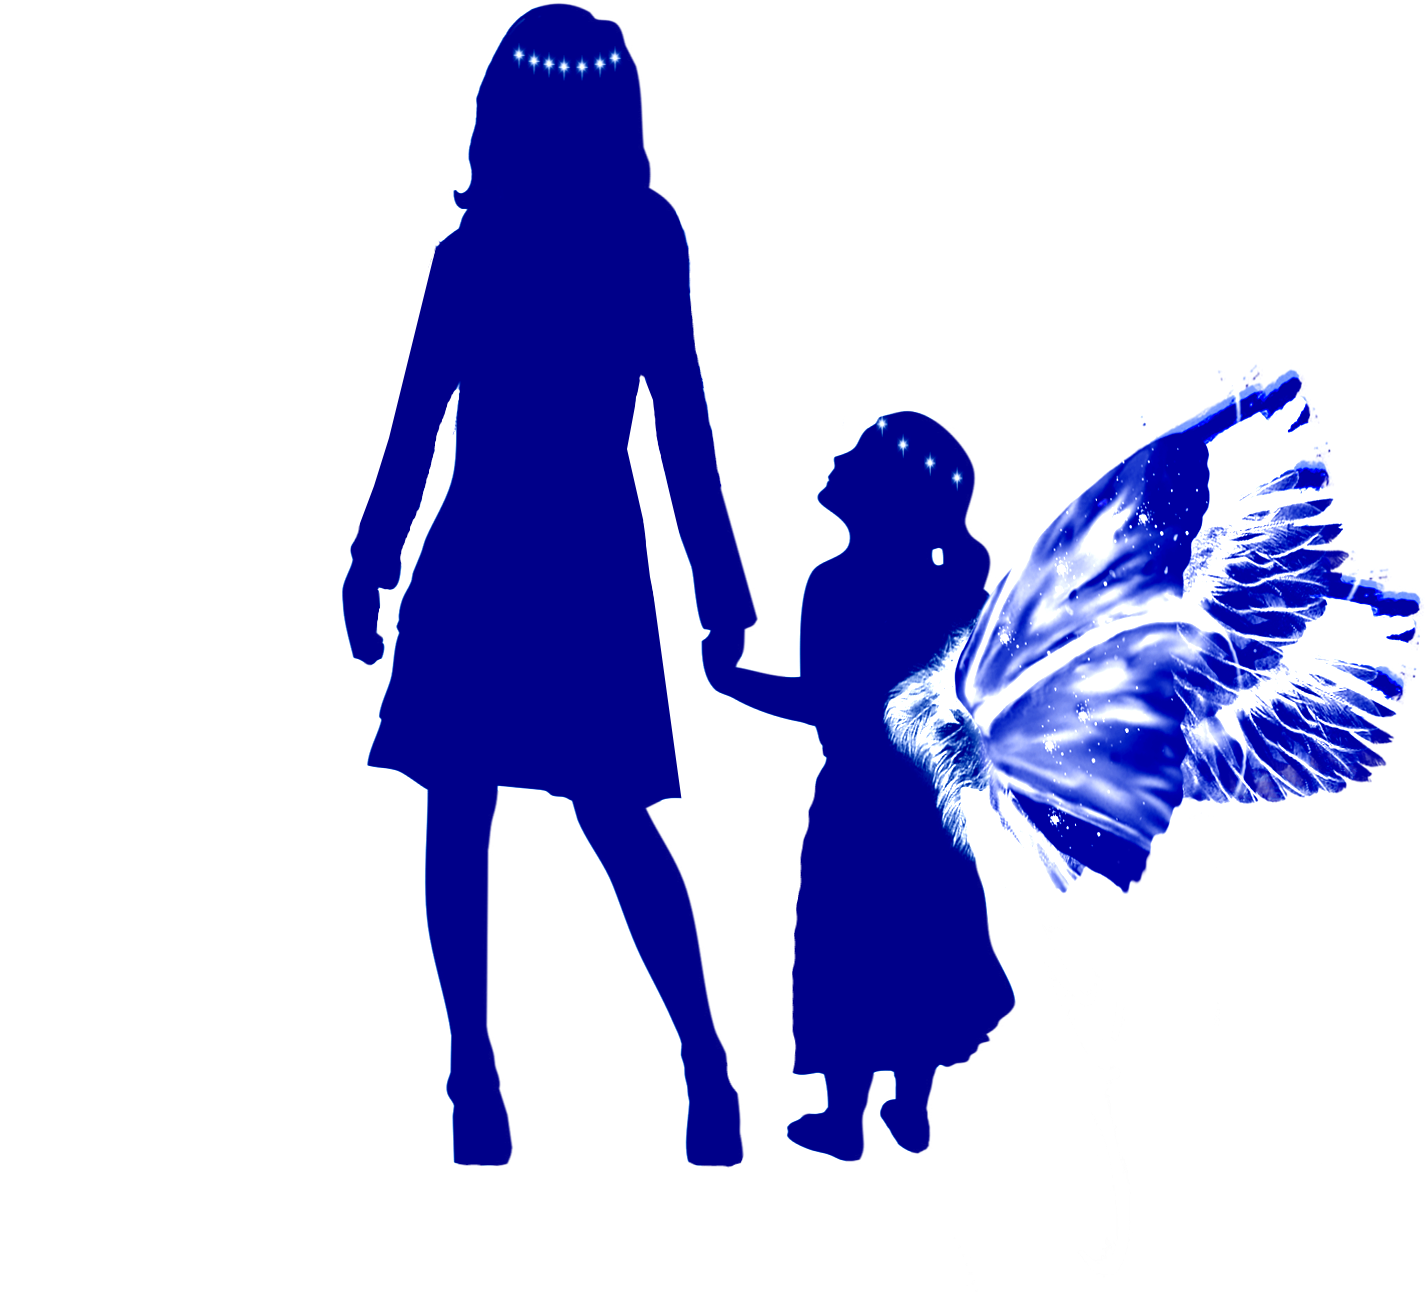 boy and girl angel clipart free